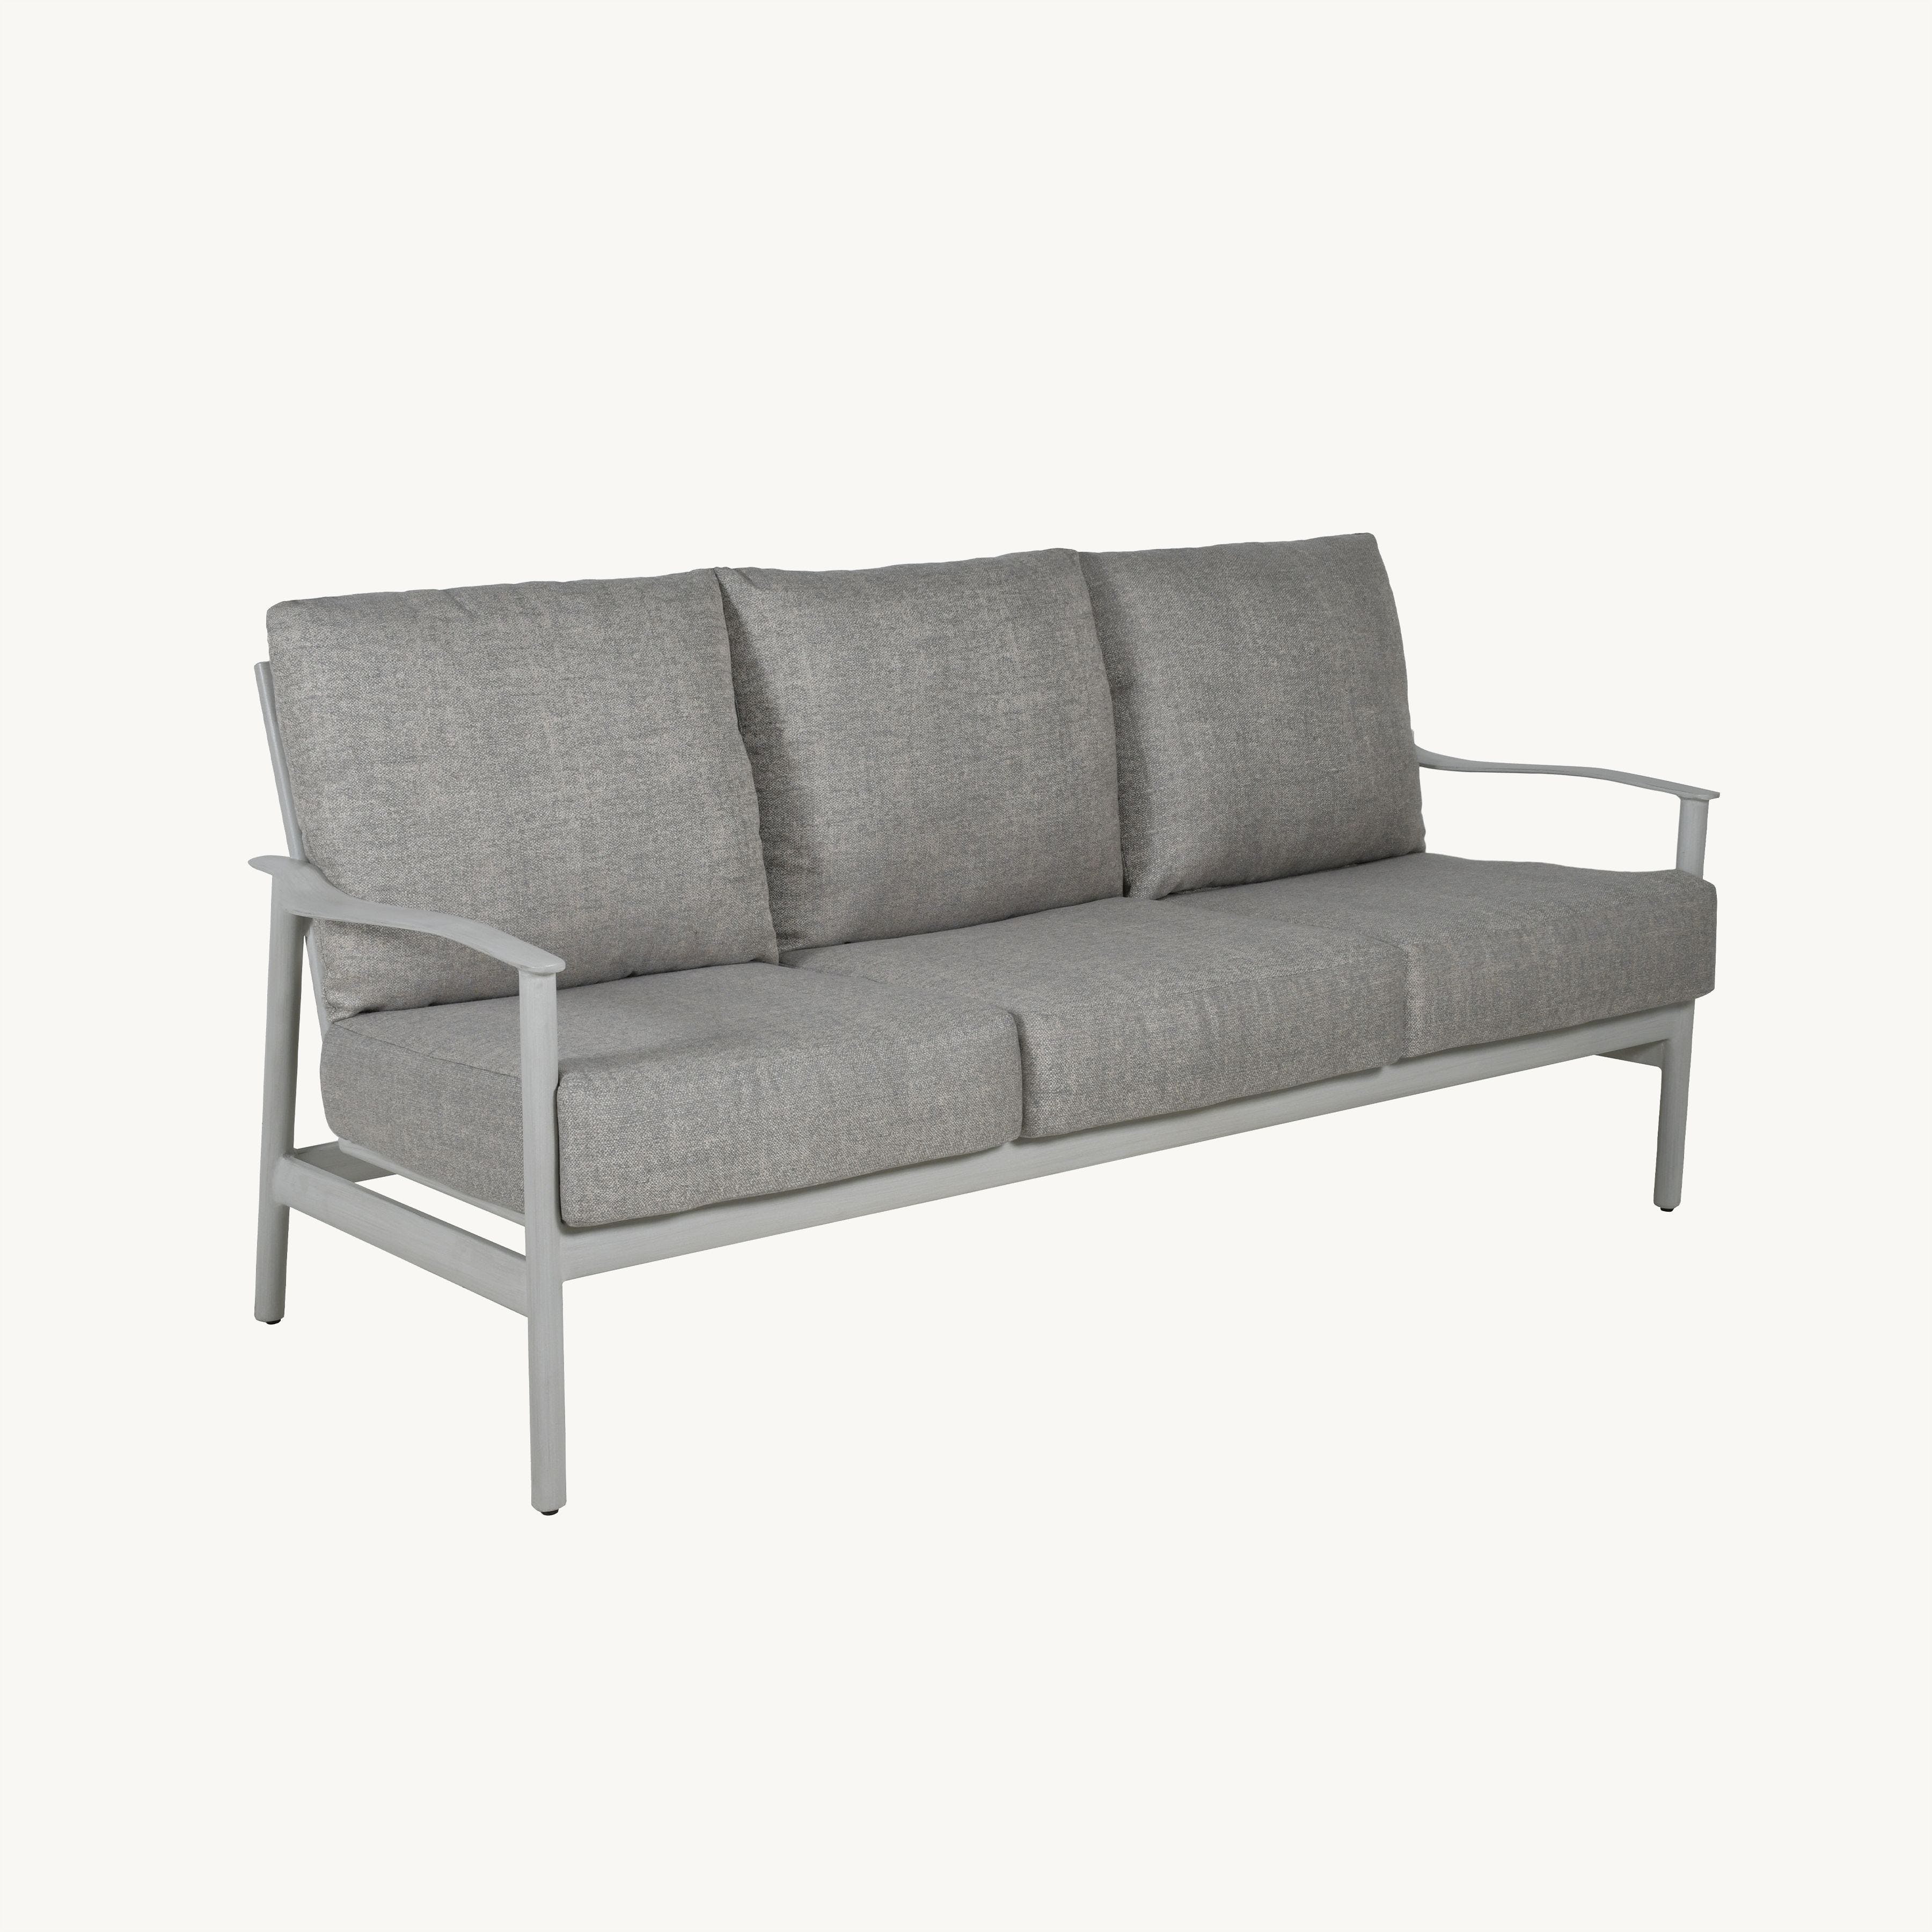 Barbados Cushion Lounge Sofa By Castelle